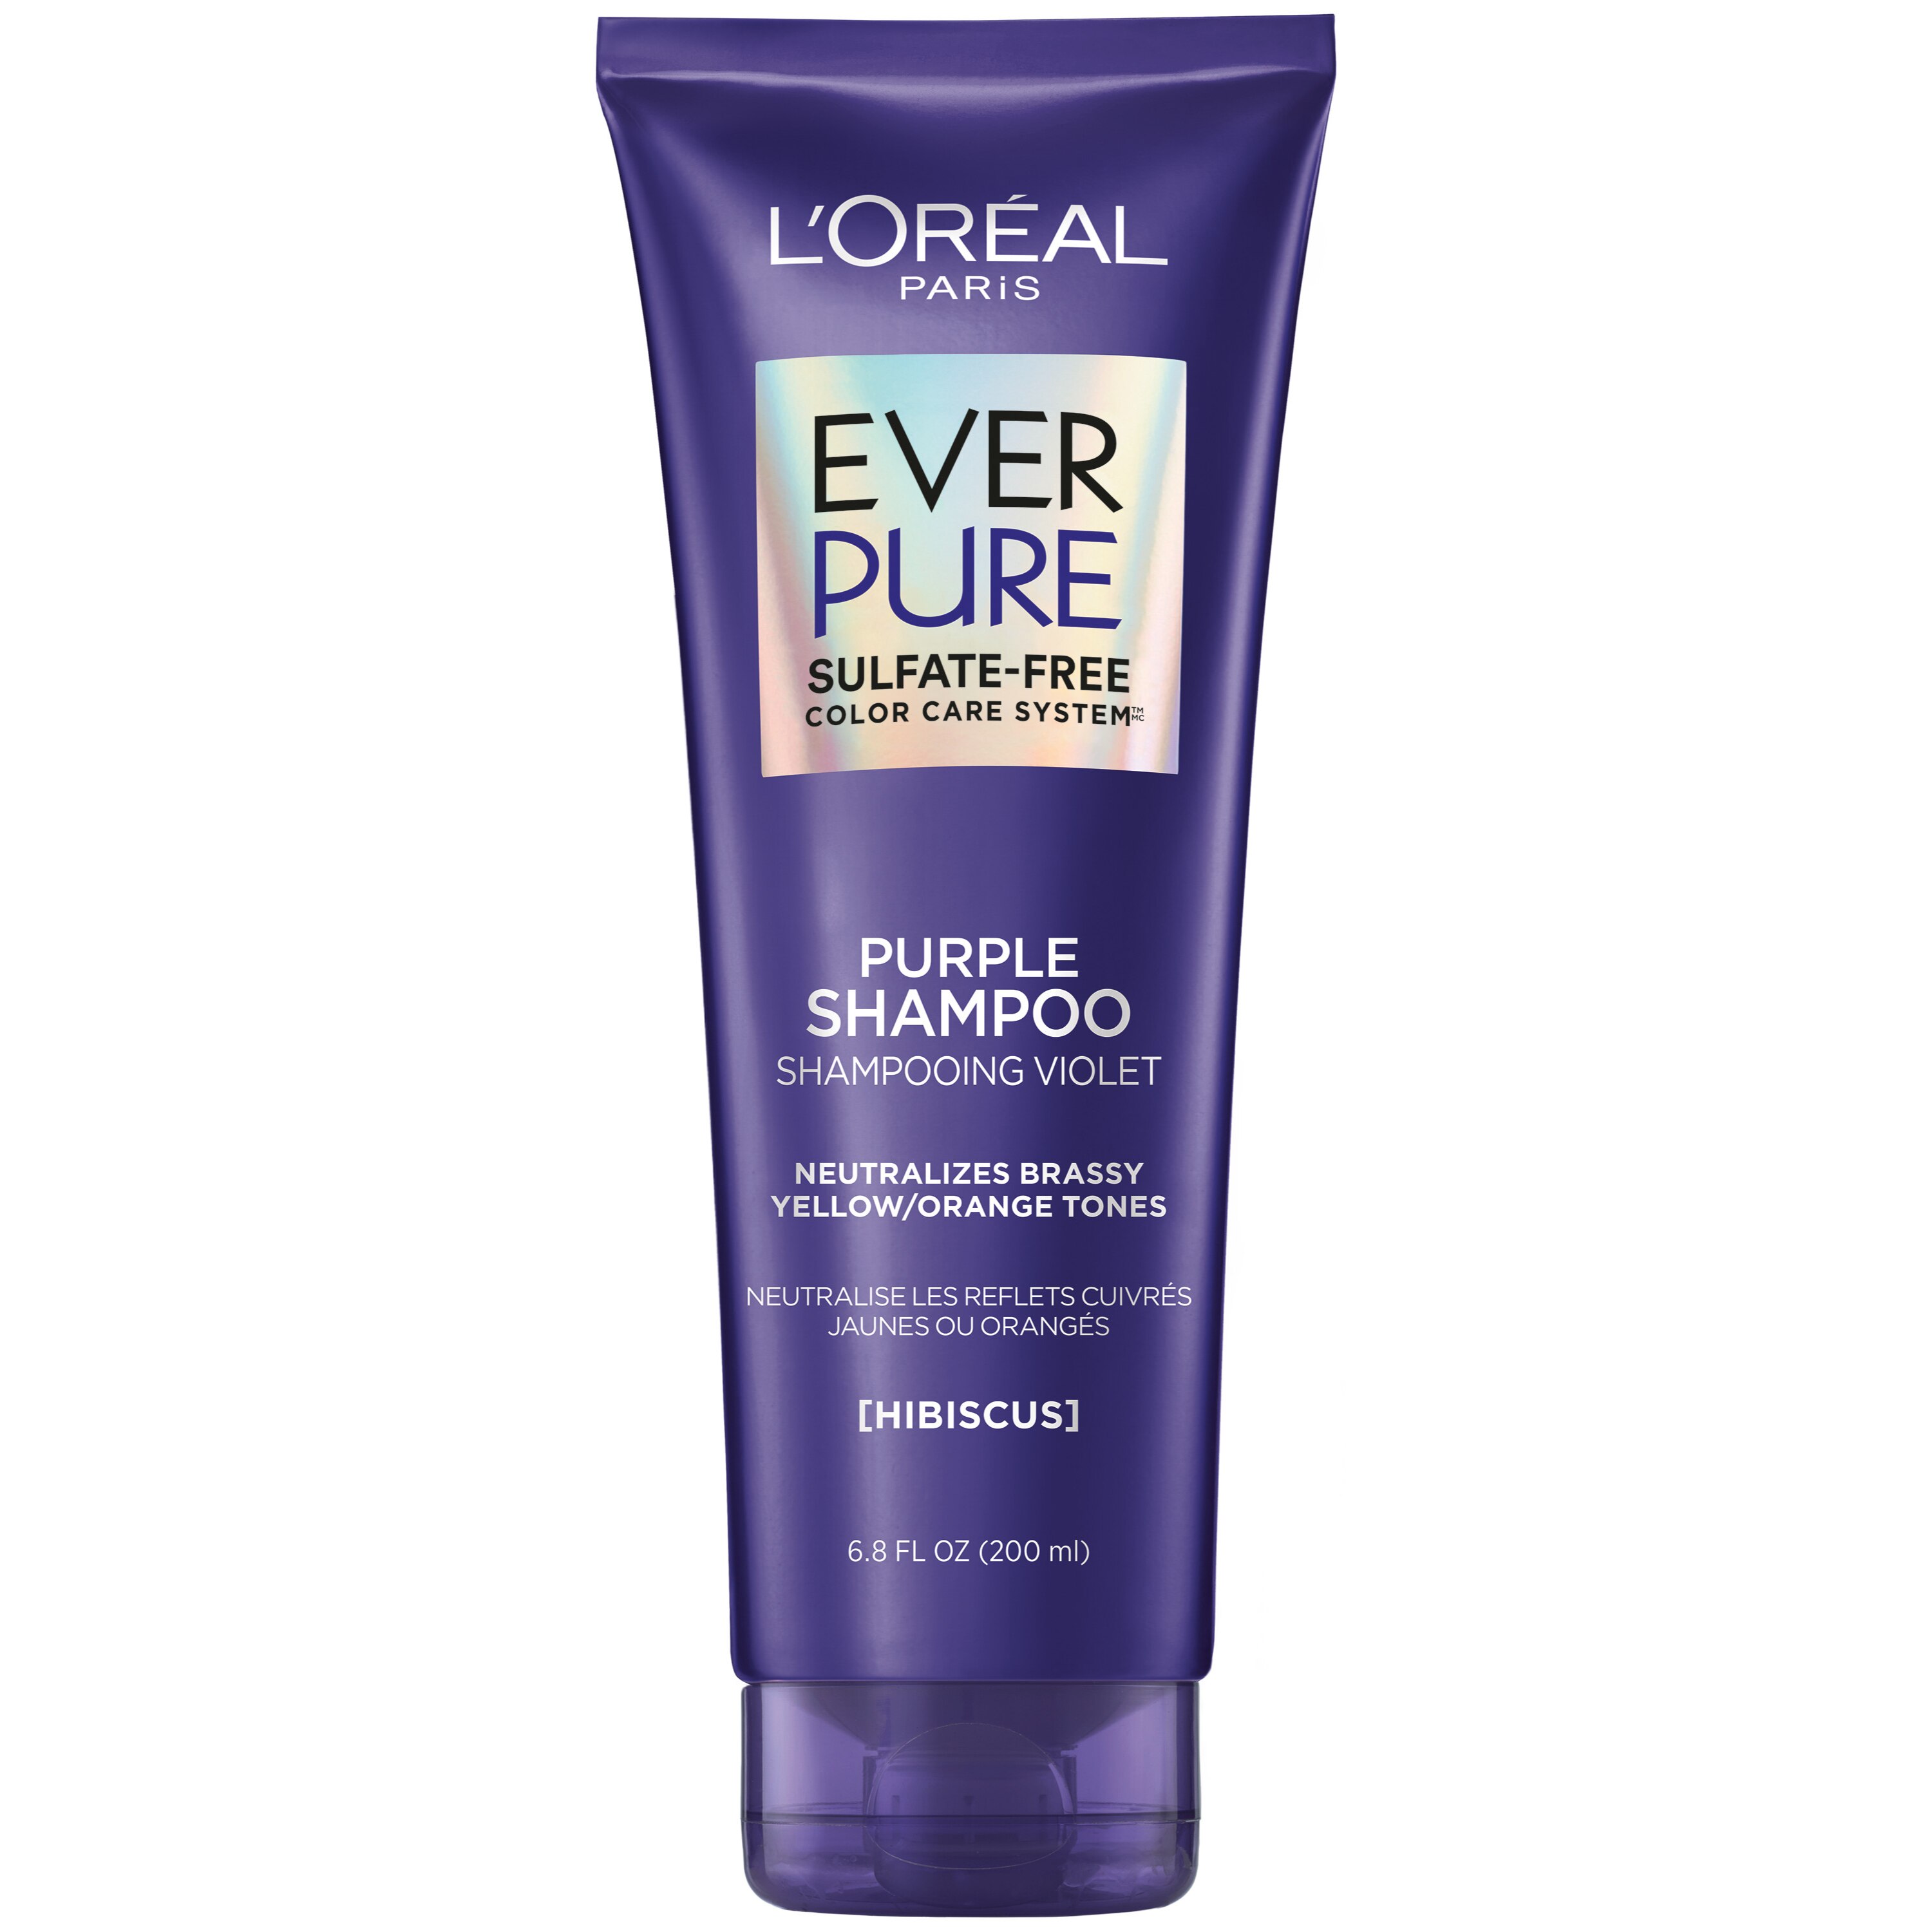 L'Oreal Paris EverPure Sulfate Free Purple Shampoo Pick Up In Store TODAY at CVS